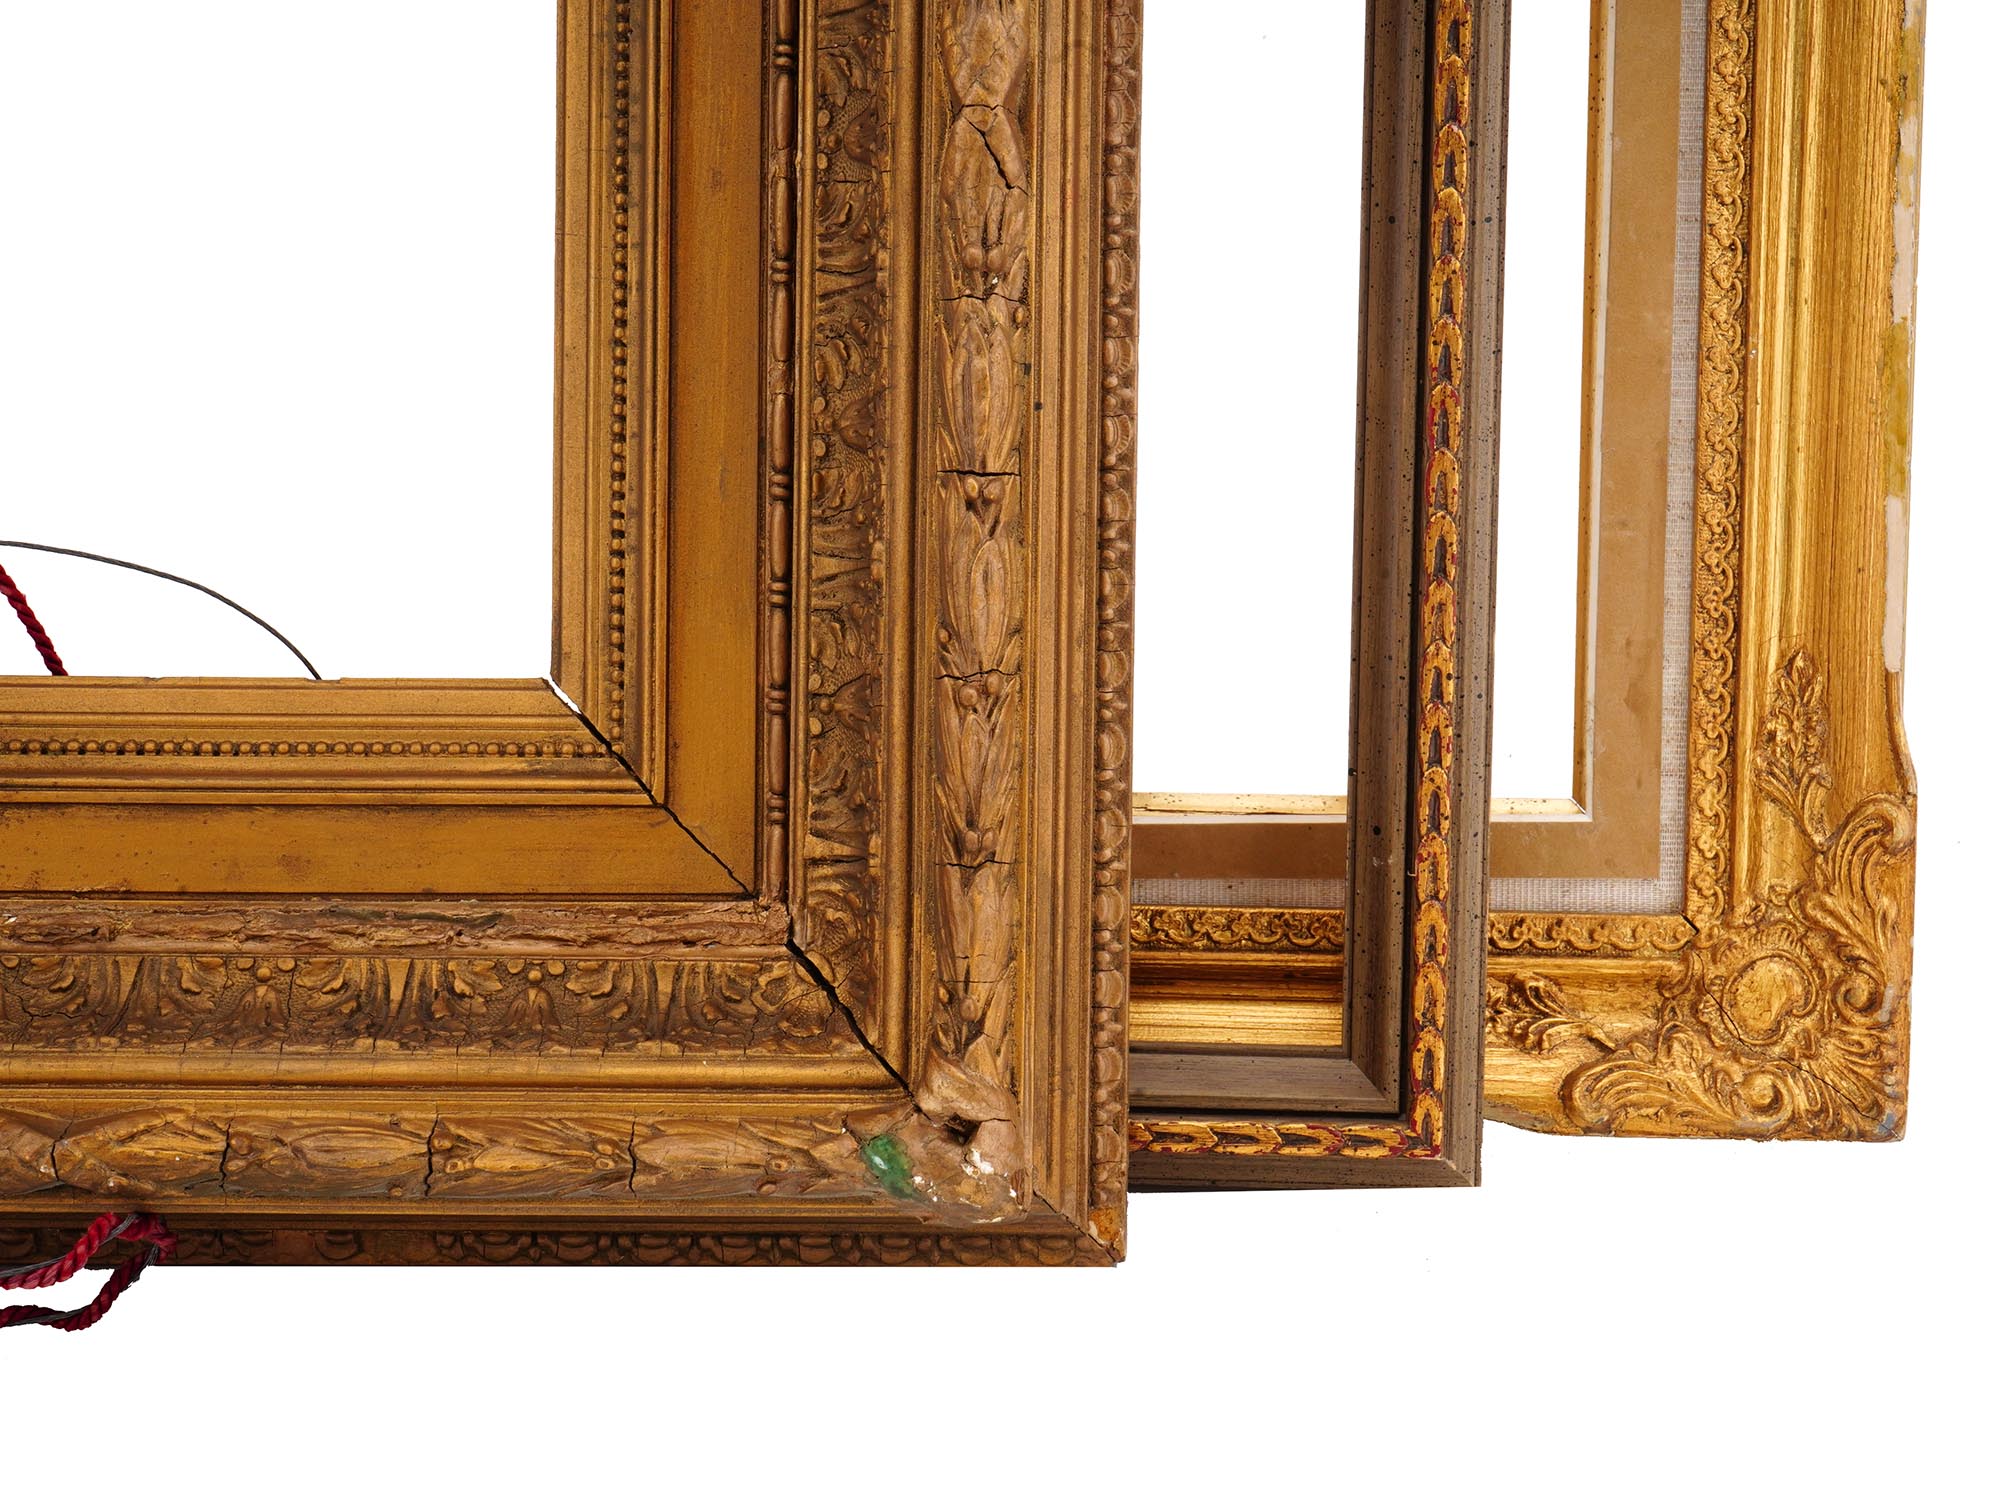 ANTIQUE ORNATE GILT WOODEN PICTURE FRAMES PIC-2